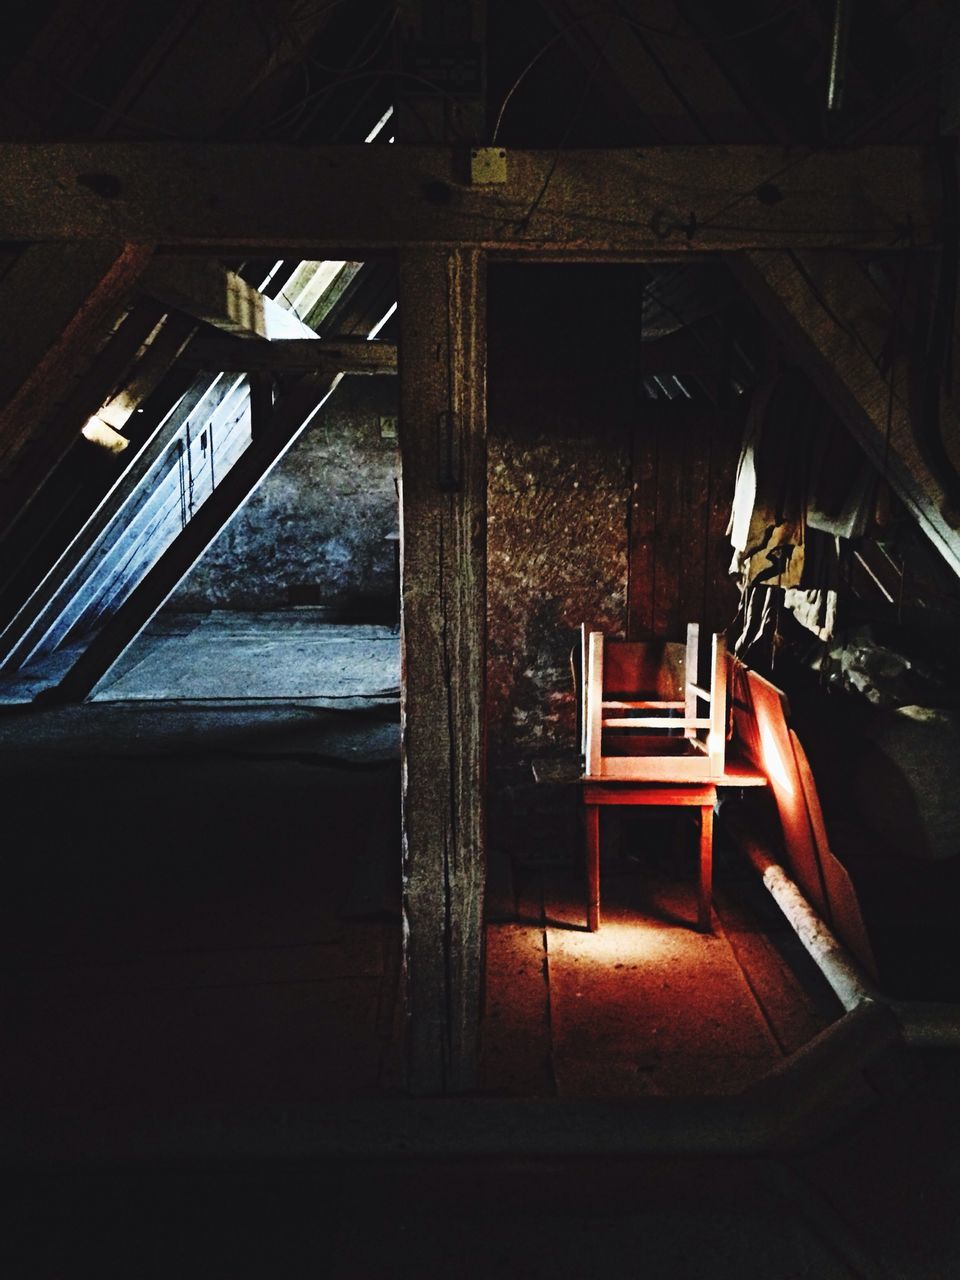 built structure, architecture, abandoned, indoors, window, obsolete, old, low angle view, building exterior, damaged, house, steps, no people, run-down, night, building, staircase, sunlight, steps and staircases, absence